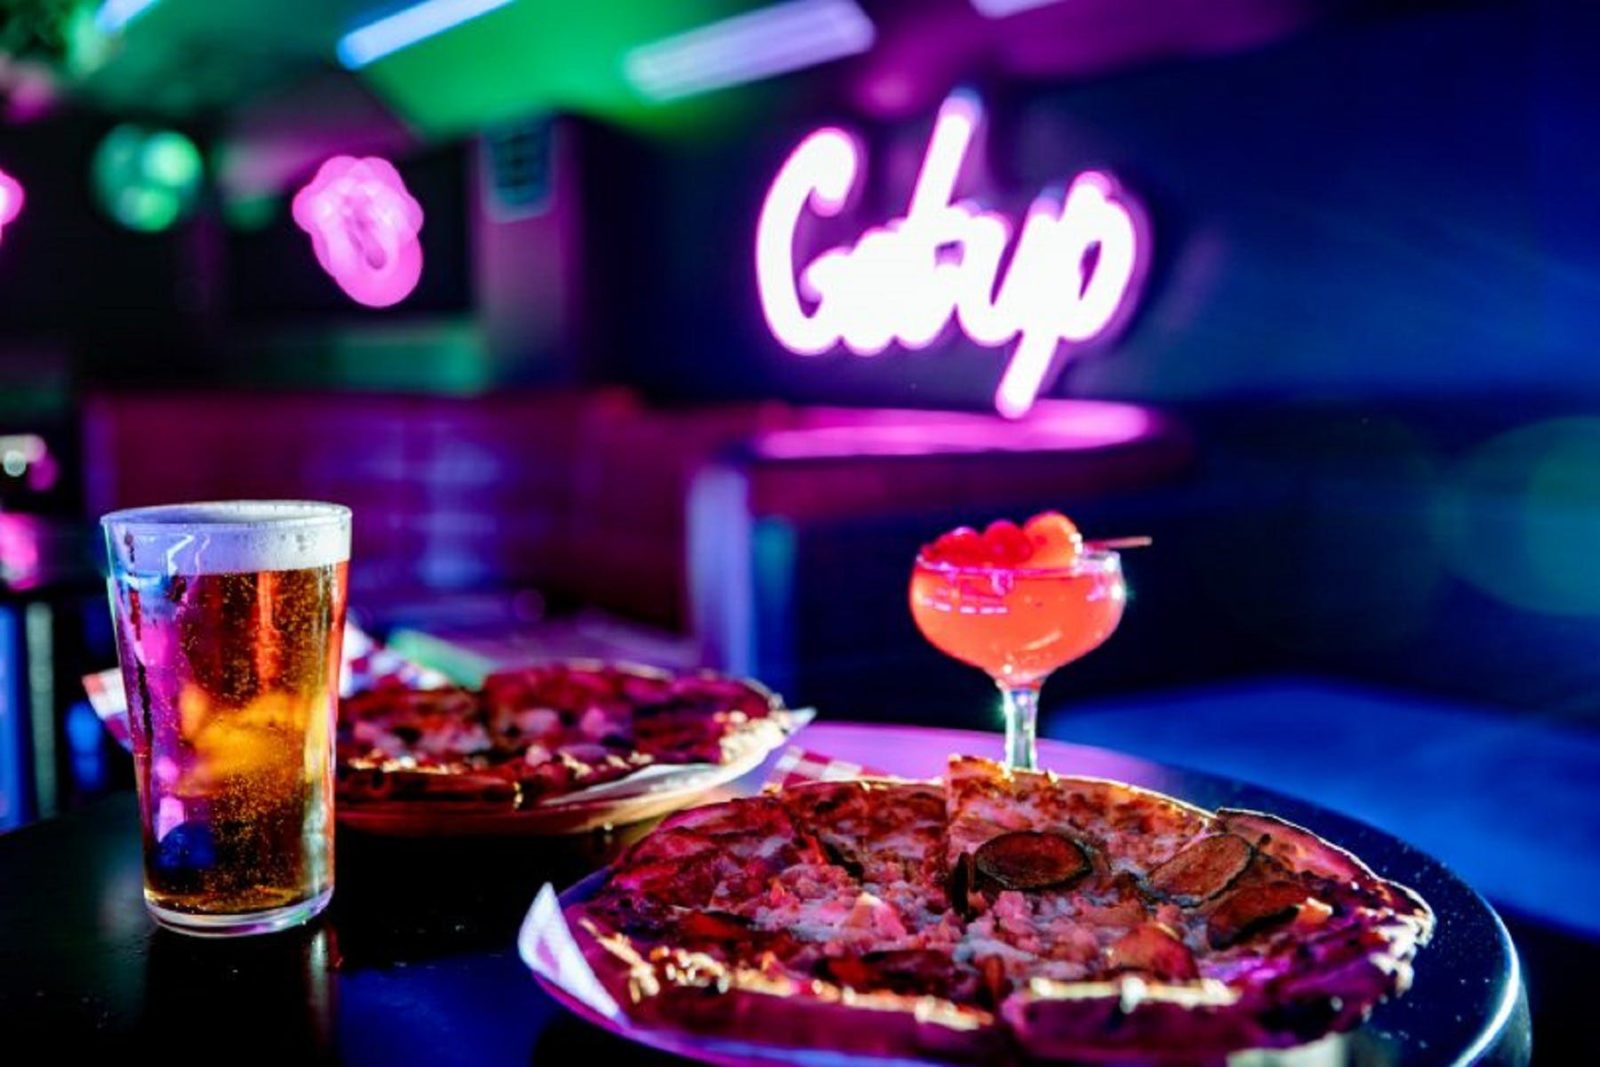 Beer, pizza and cocktails